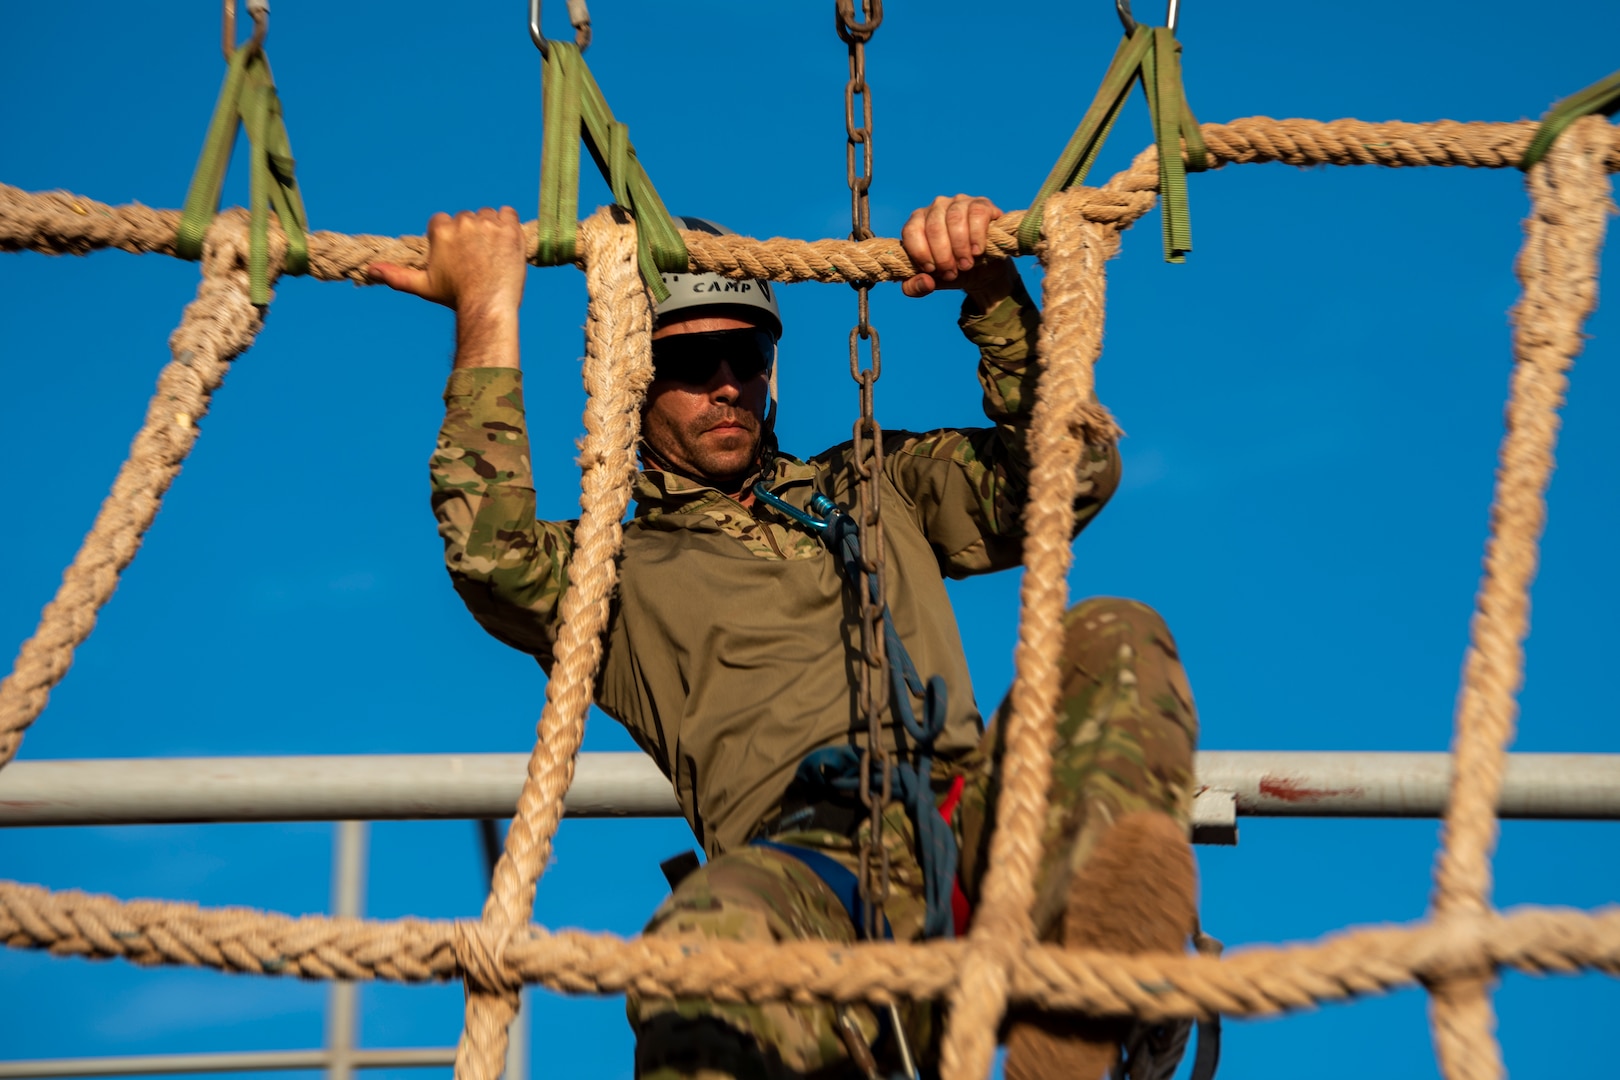 U.S. Air Force Tech. Sgt. Matthew O’Brien, an 82nd Expeditionary Rescue Squadron survival, evasion, resistance and escape specialist, climbs a rope during the French Desert Commando Course (FDCC) at Arta Range, Djibouti, April 26, 2022.